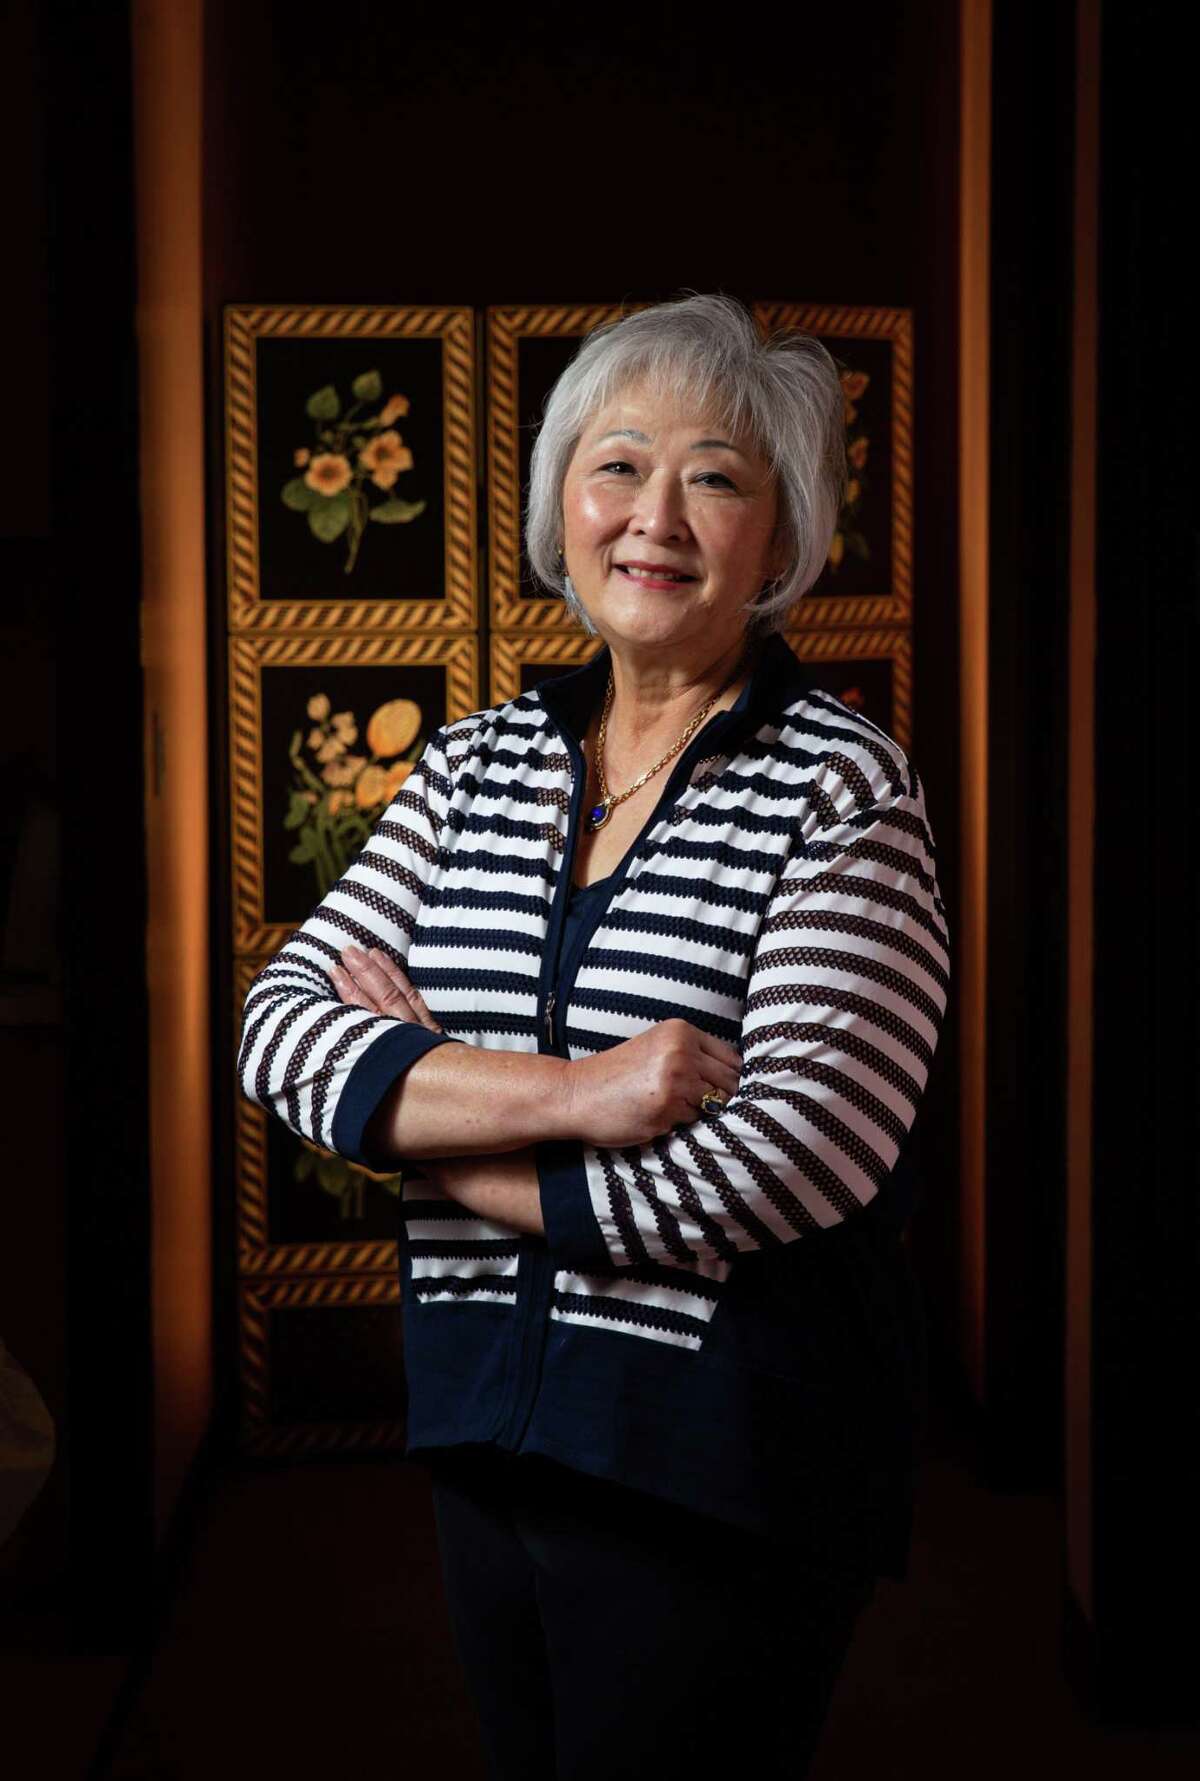 Donna Fujimoto Cole, CEO and president of Cole Chemical, poses for a portrait Tuesday, Dec. 21, 2021, at her office in Houston.